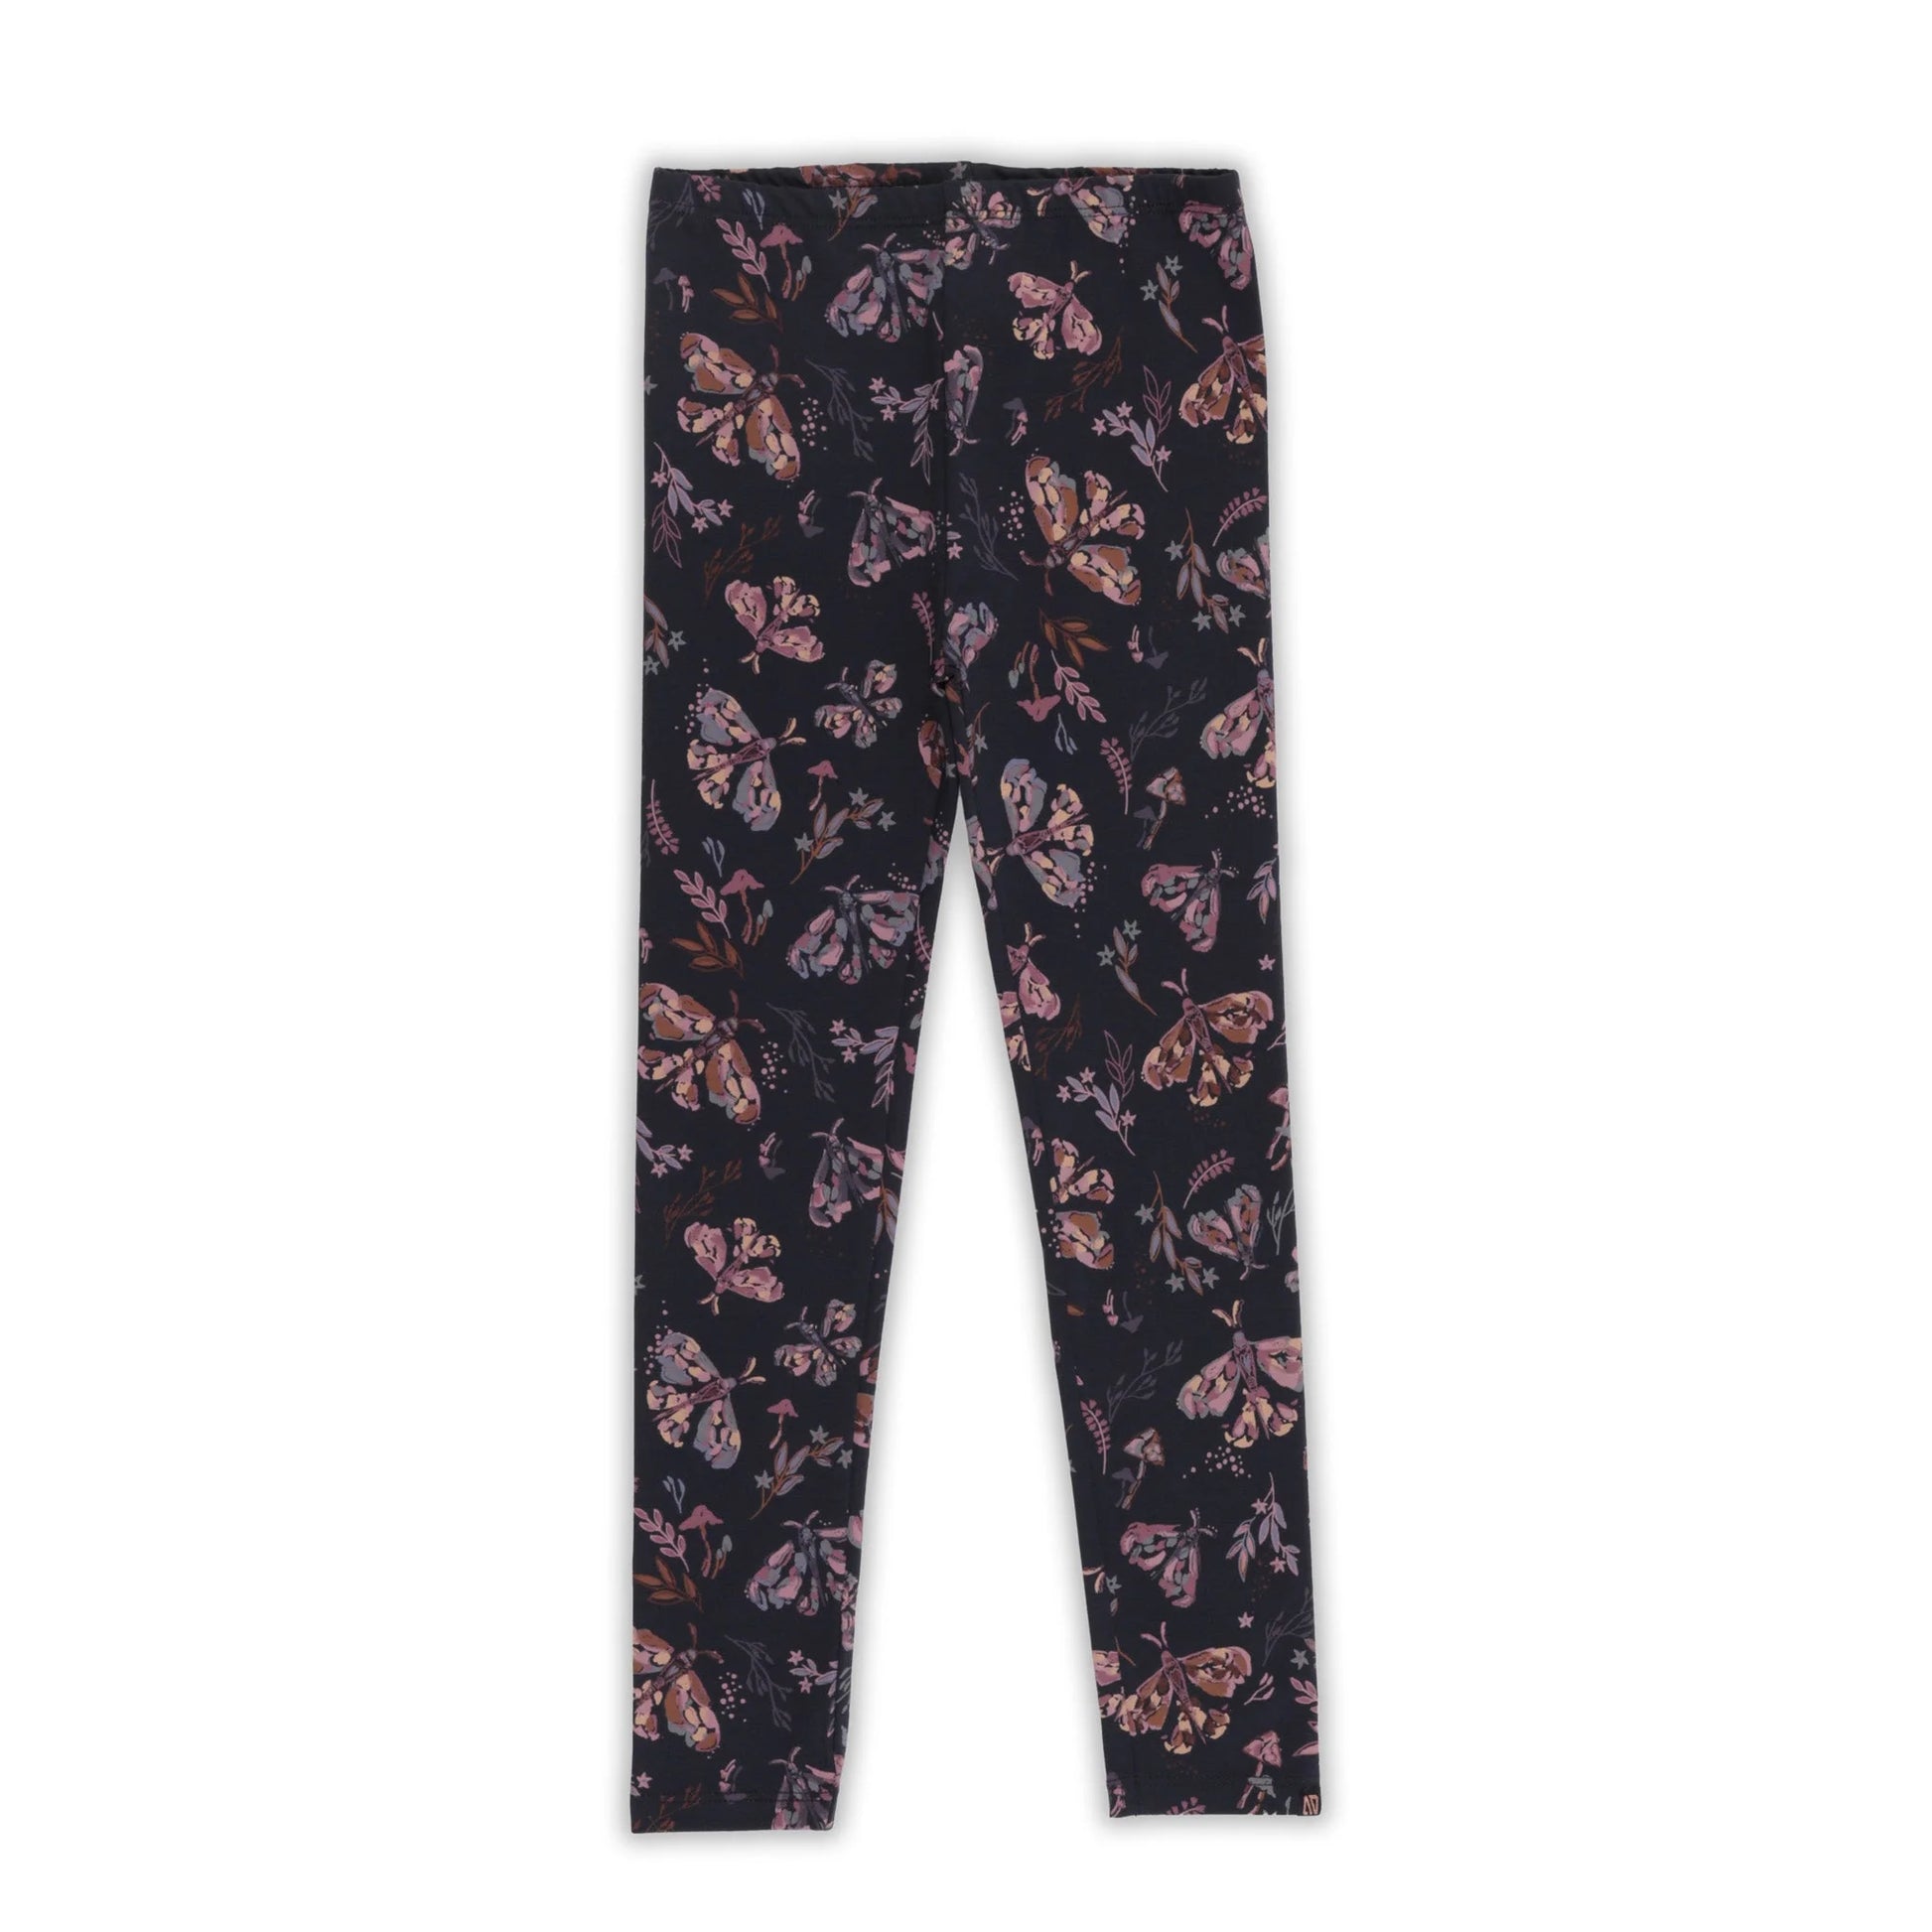 Nanö butterfly leggings for girls 2 to 6 years